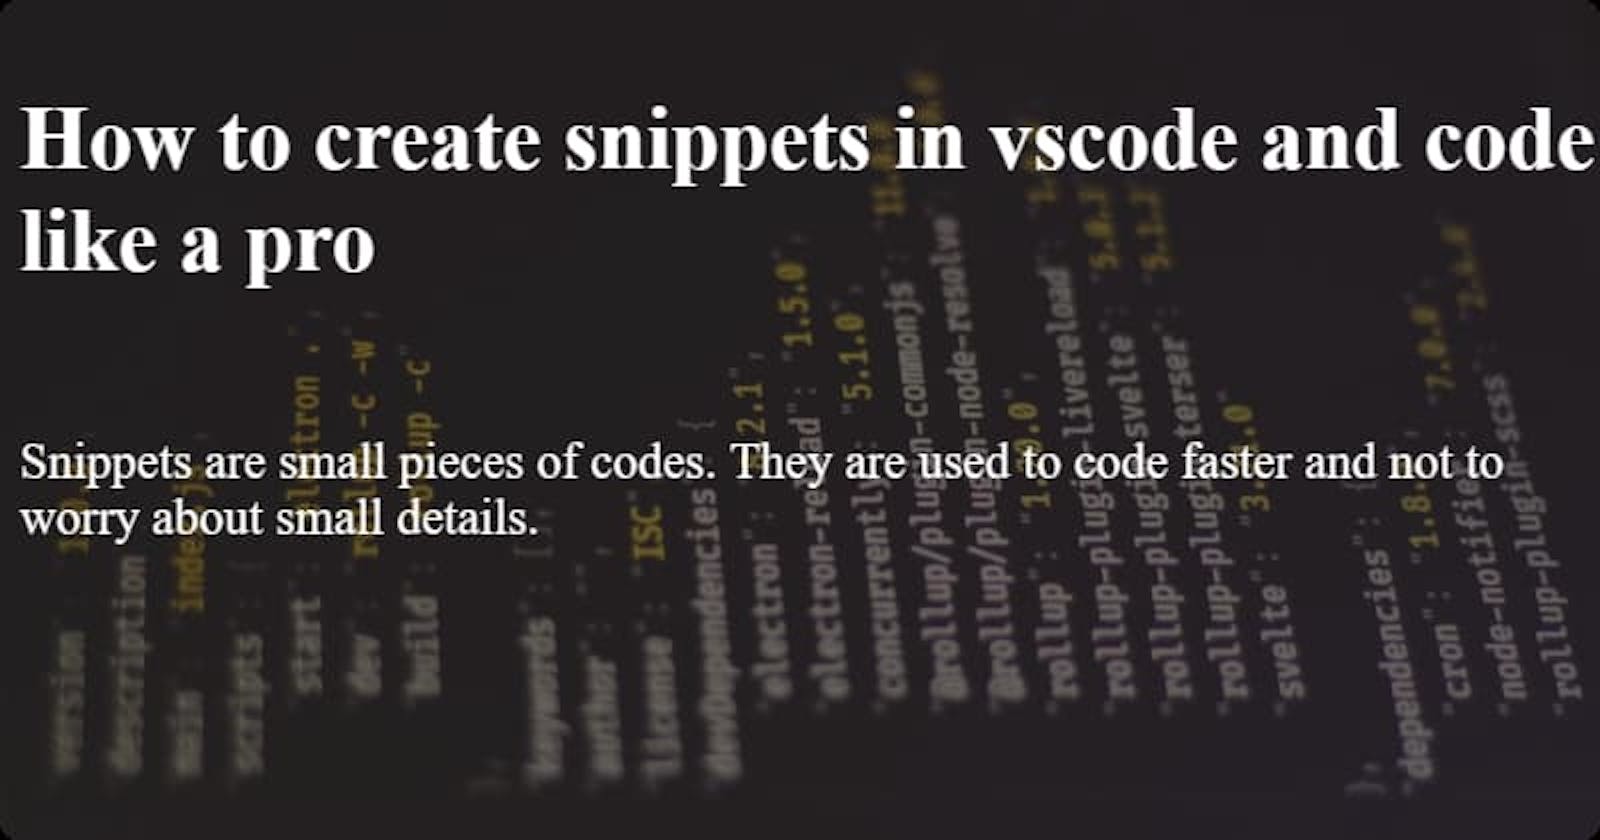 How to create snippets in vscode and code like a pro